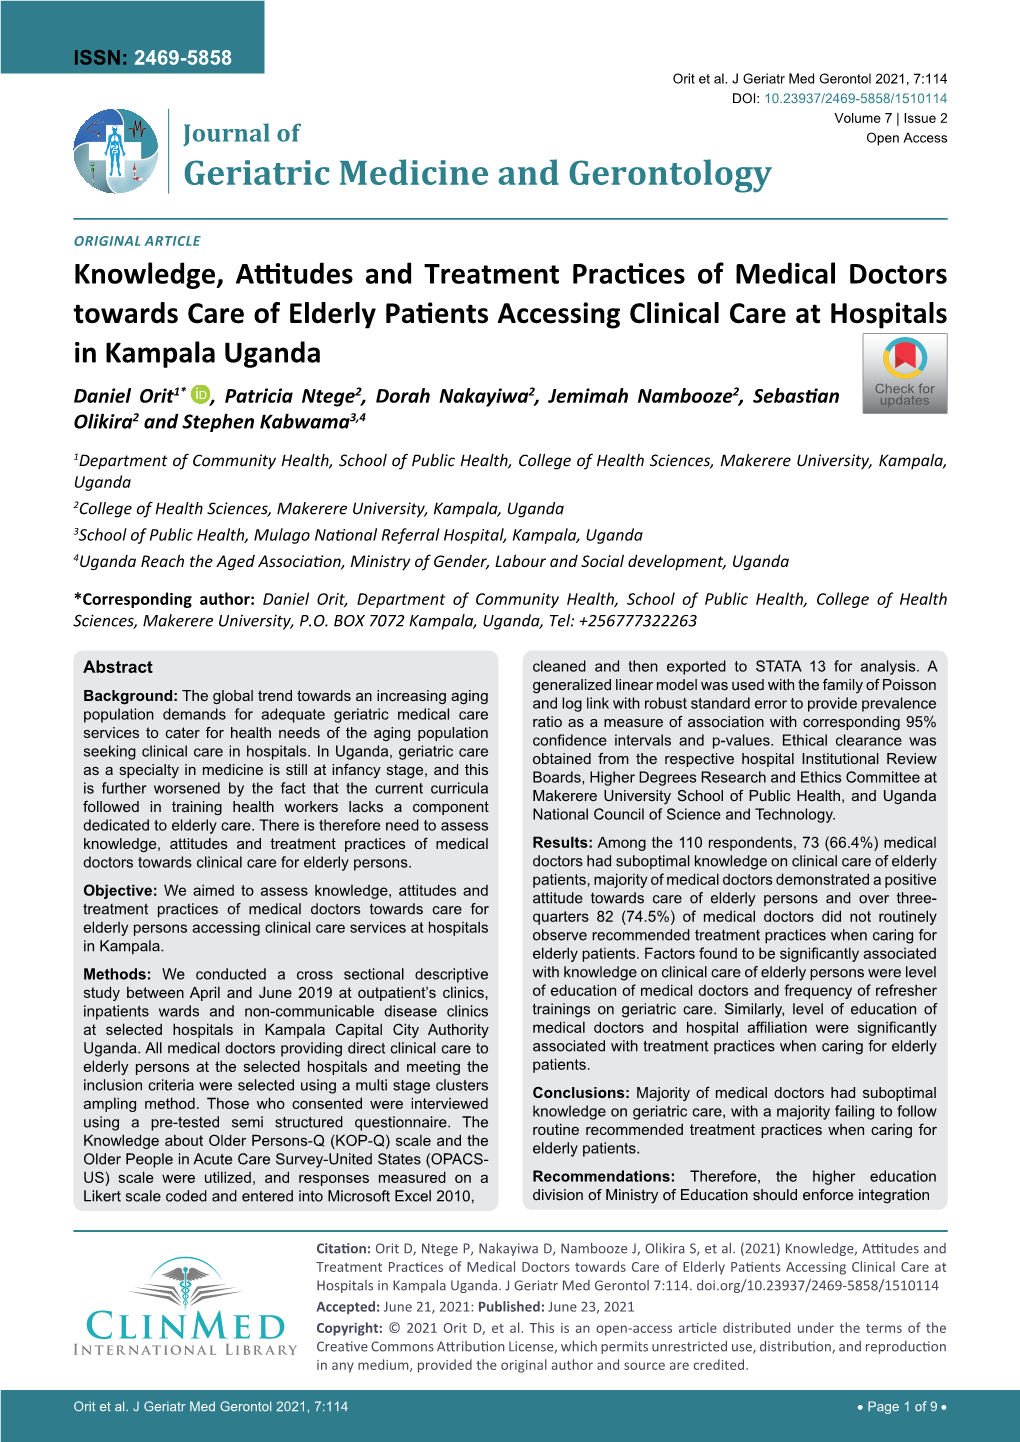 Knowledge, Attitudes and Treatment Practices of Medical Doctors Towards Care of Elderly Patients Accessing Clinical Care at Hospitals in Kampala Uganda